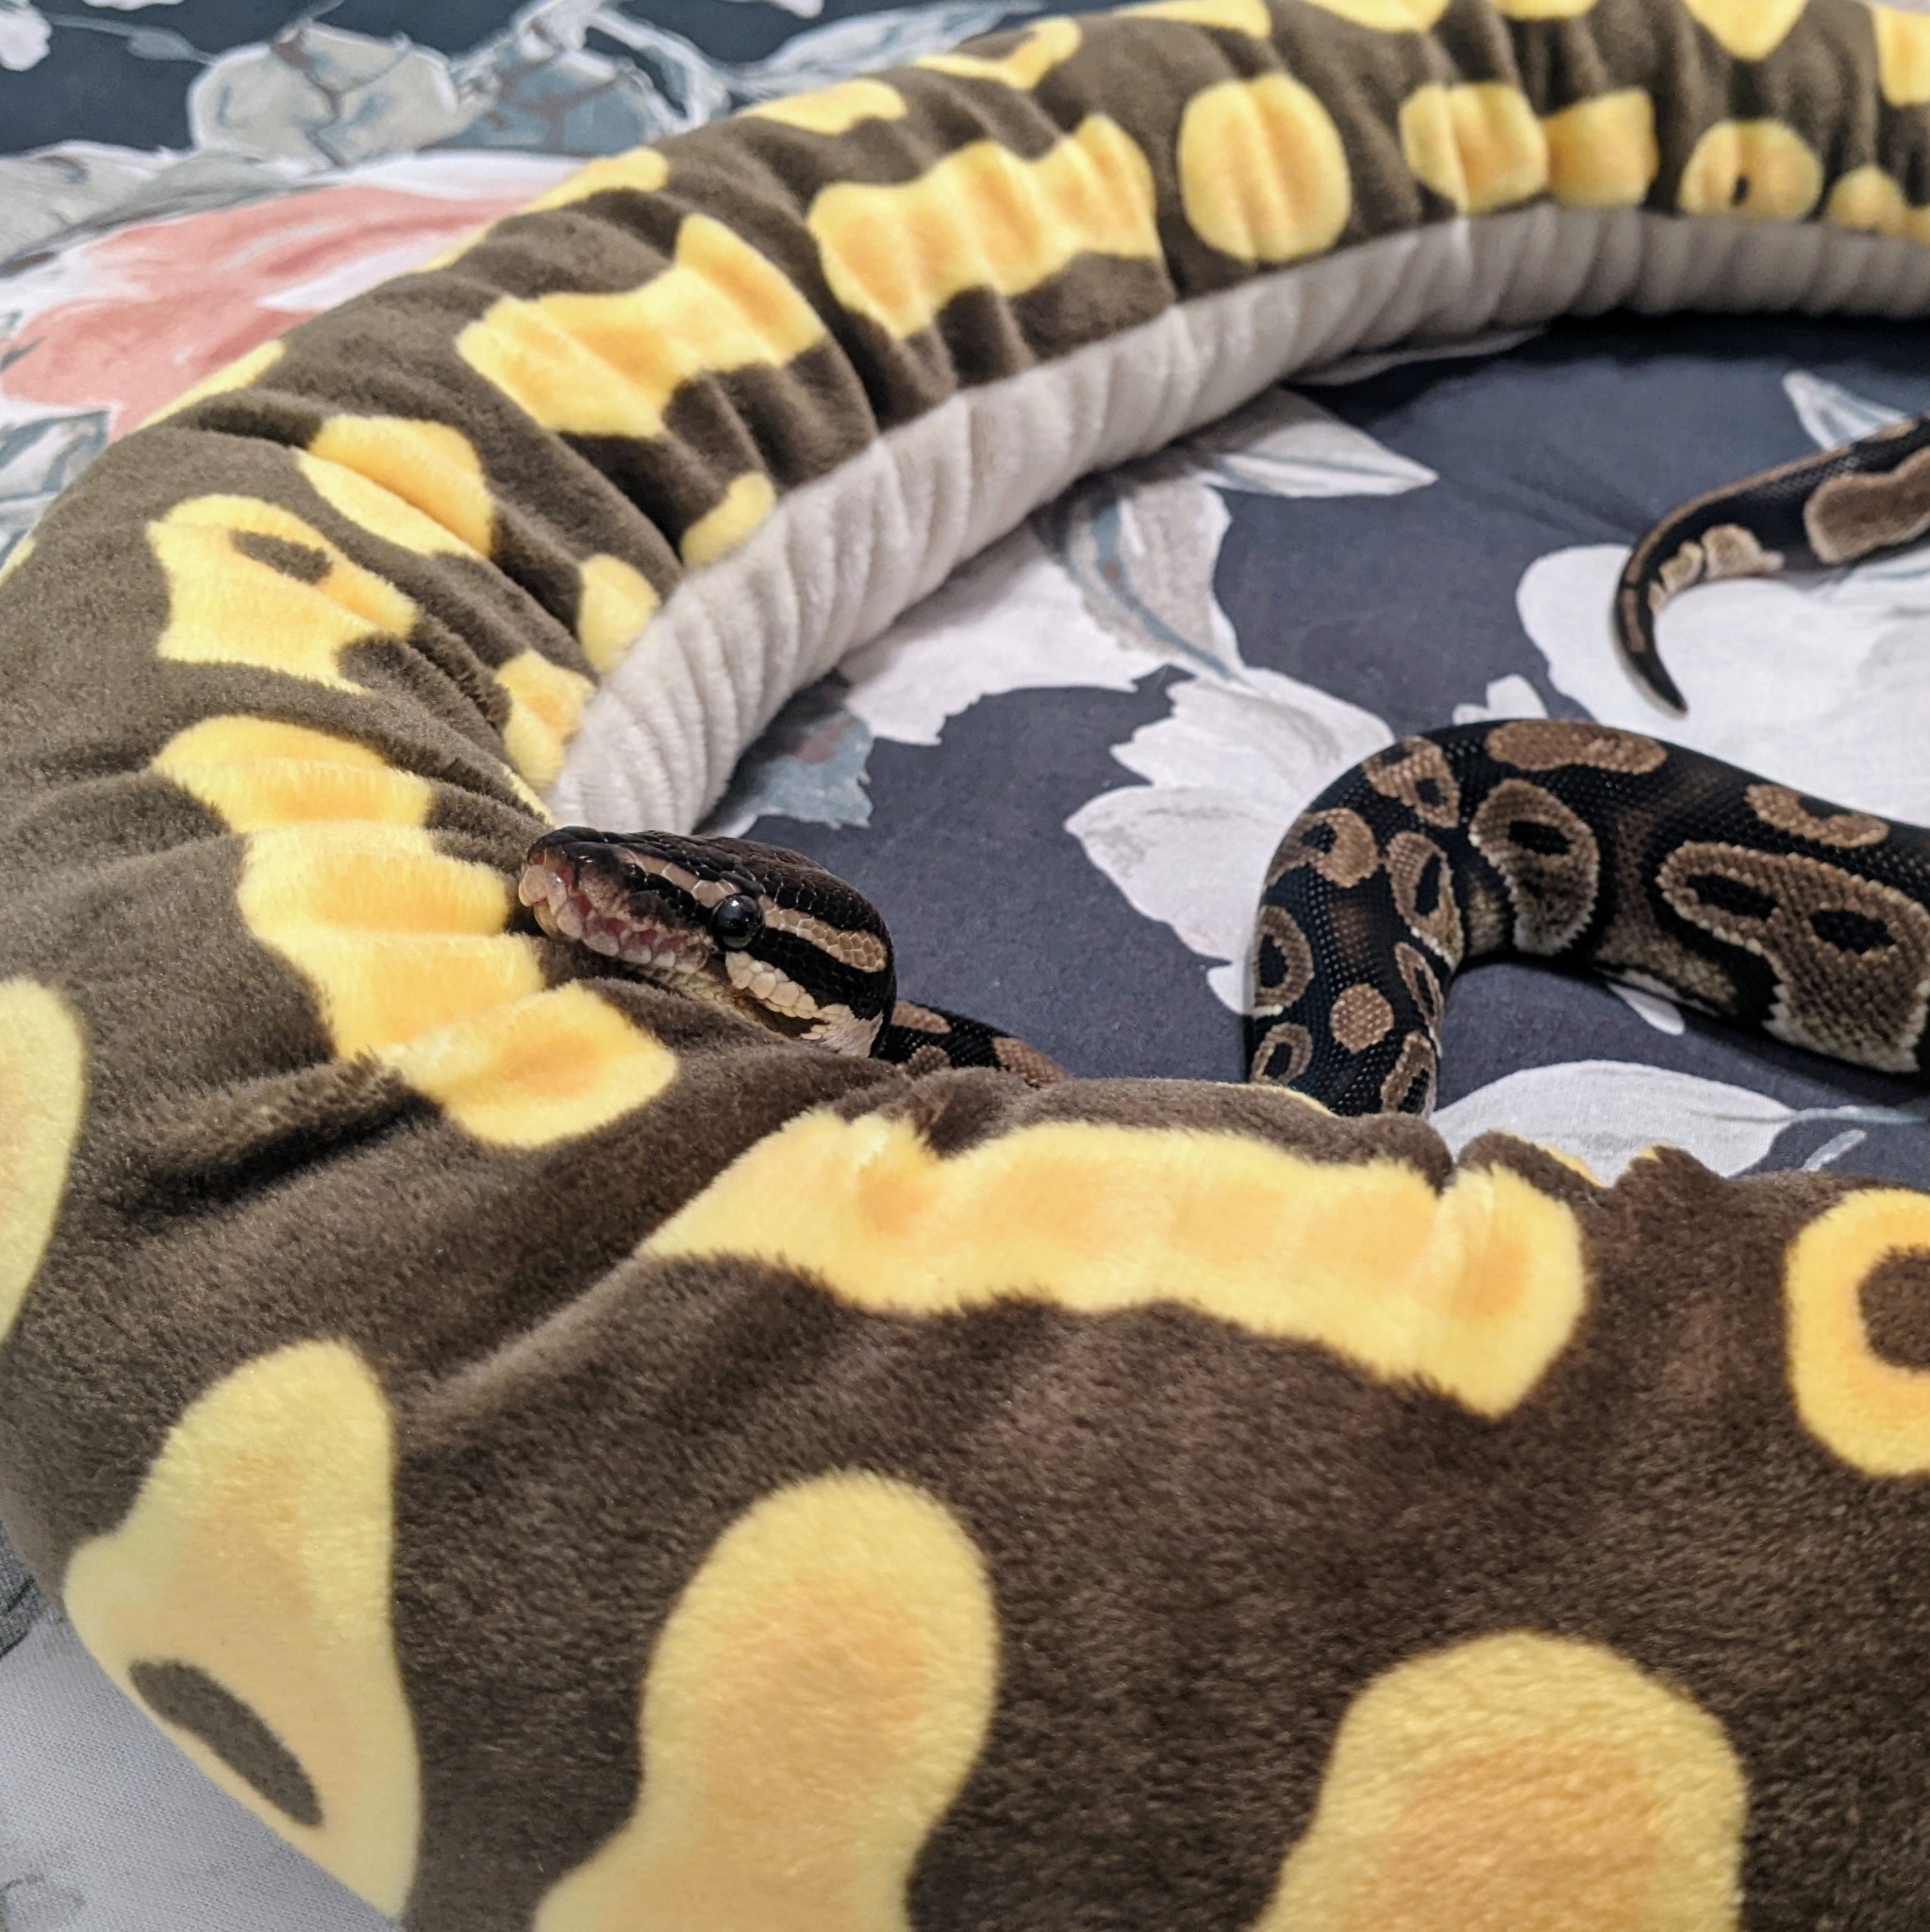 snake-named-silas:He decided this is his now. I couldn’t say no 🖤